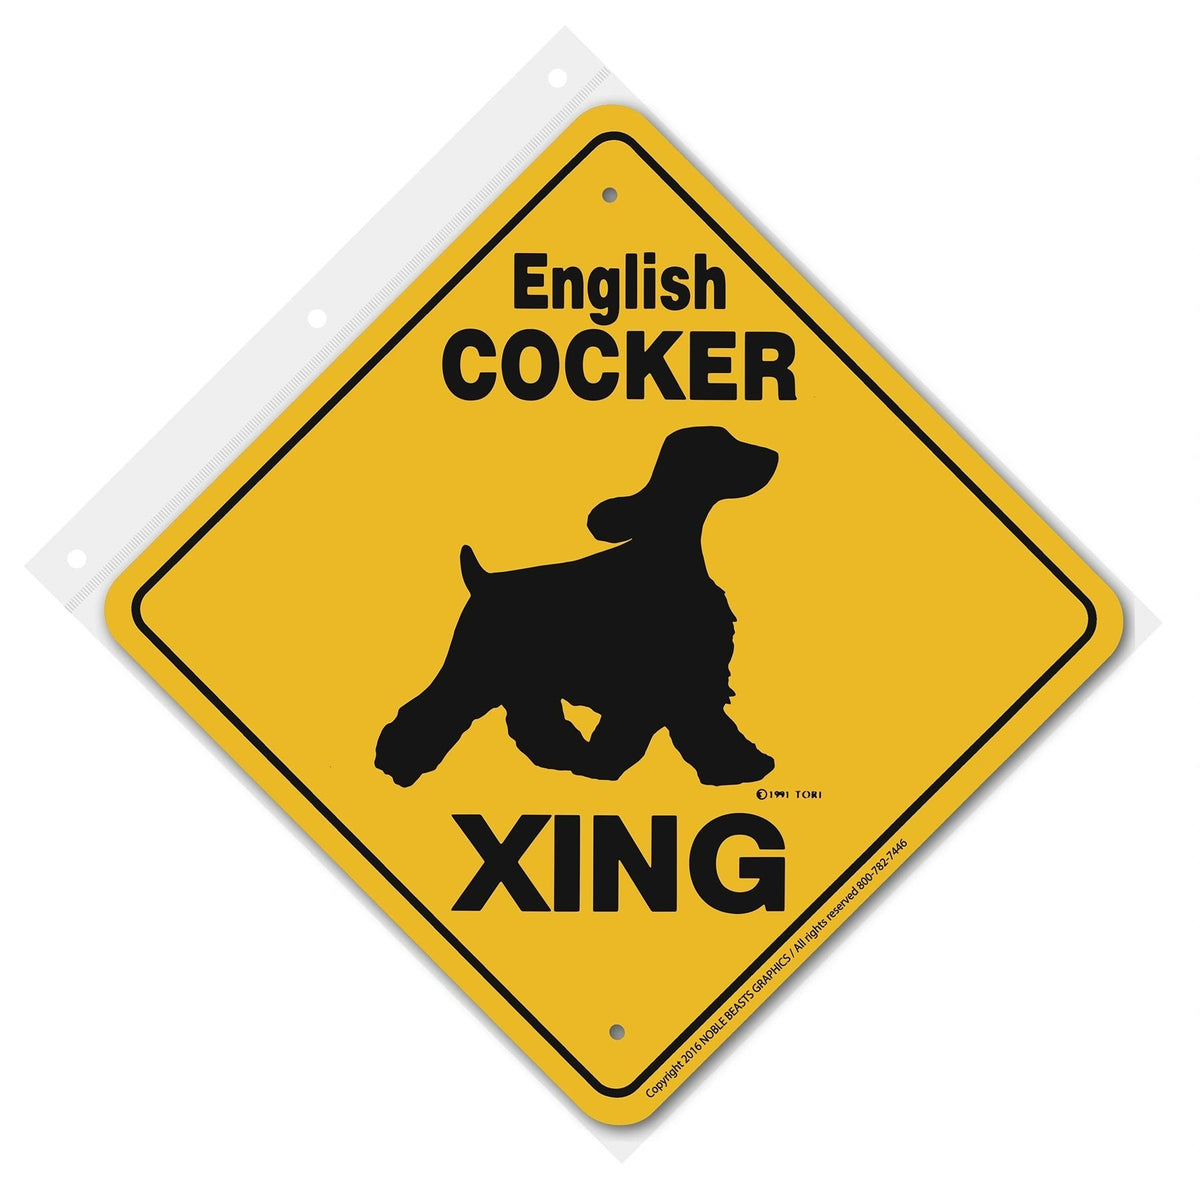 English Cocker Xing Sign Aluminum 12 in X 12 in #20632